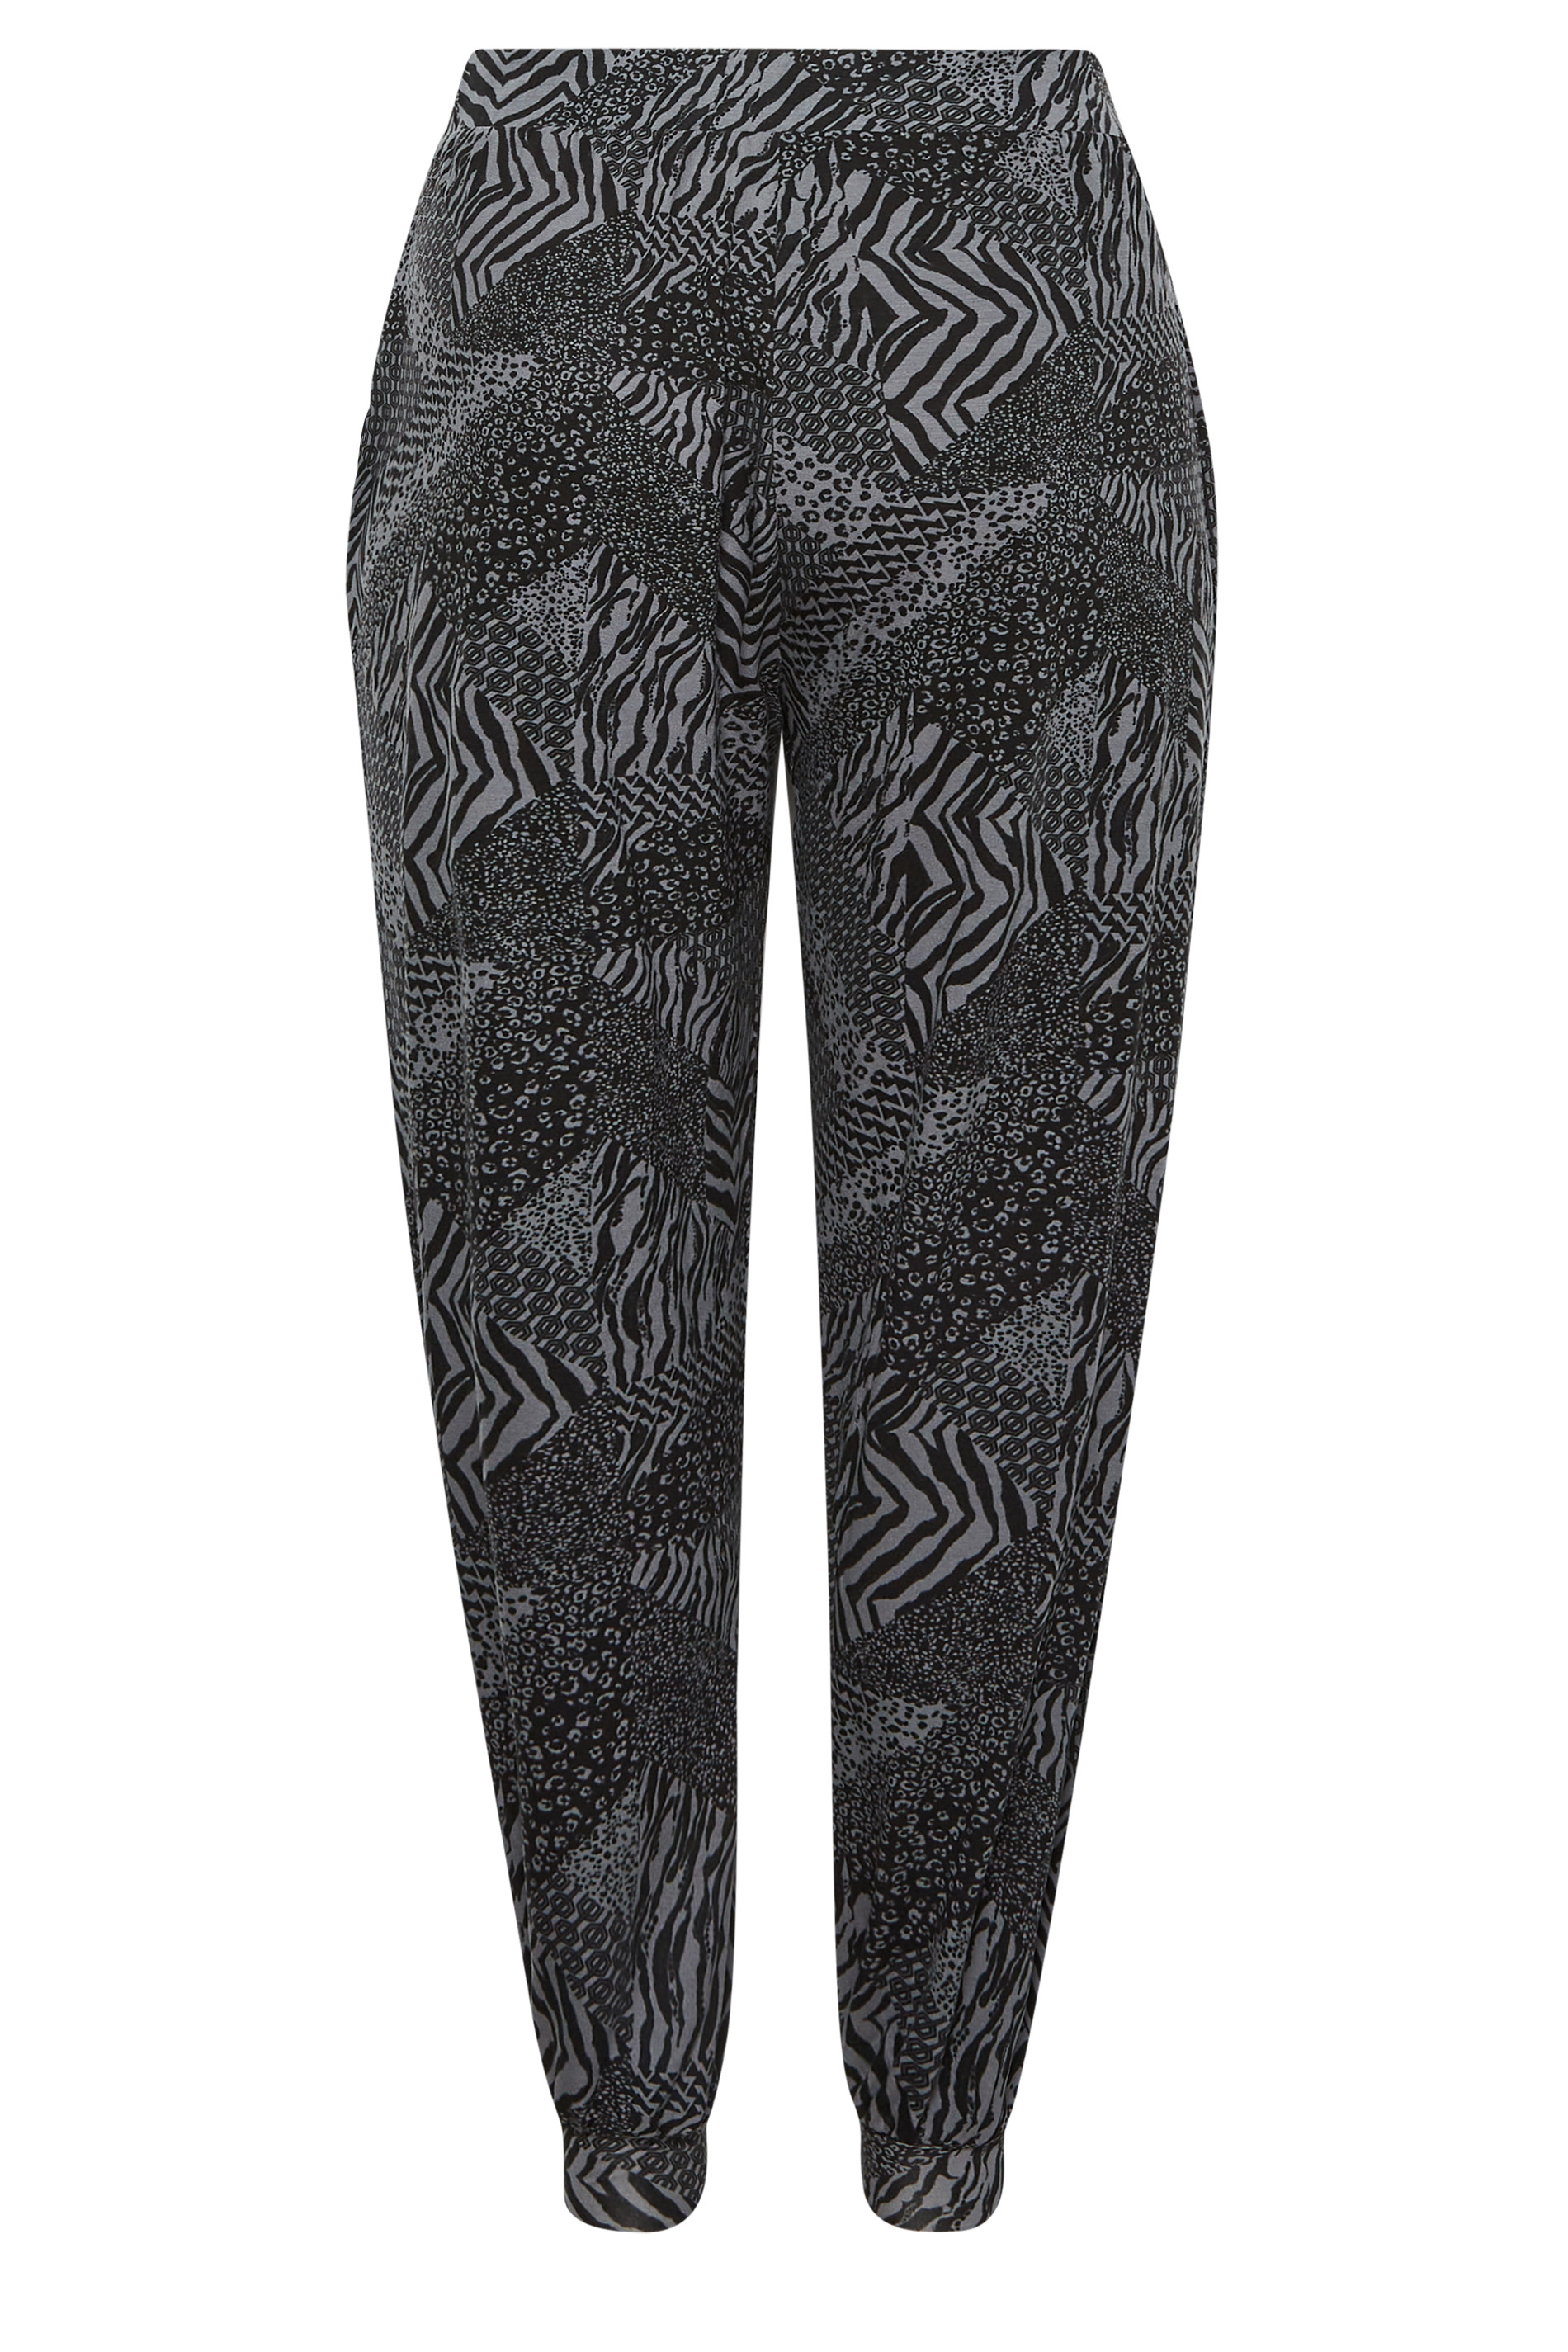 YOURS Curve Plus Size Black Cuffed Animal Print Harem Joggers | Yours ...